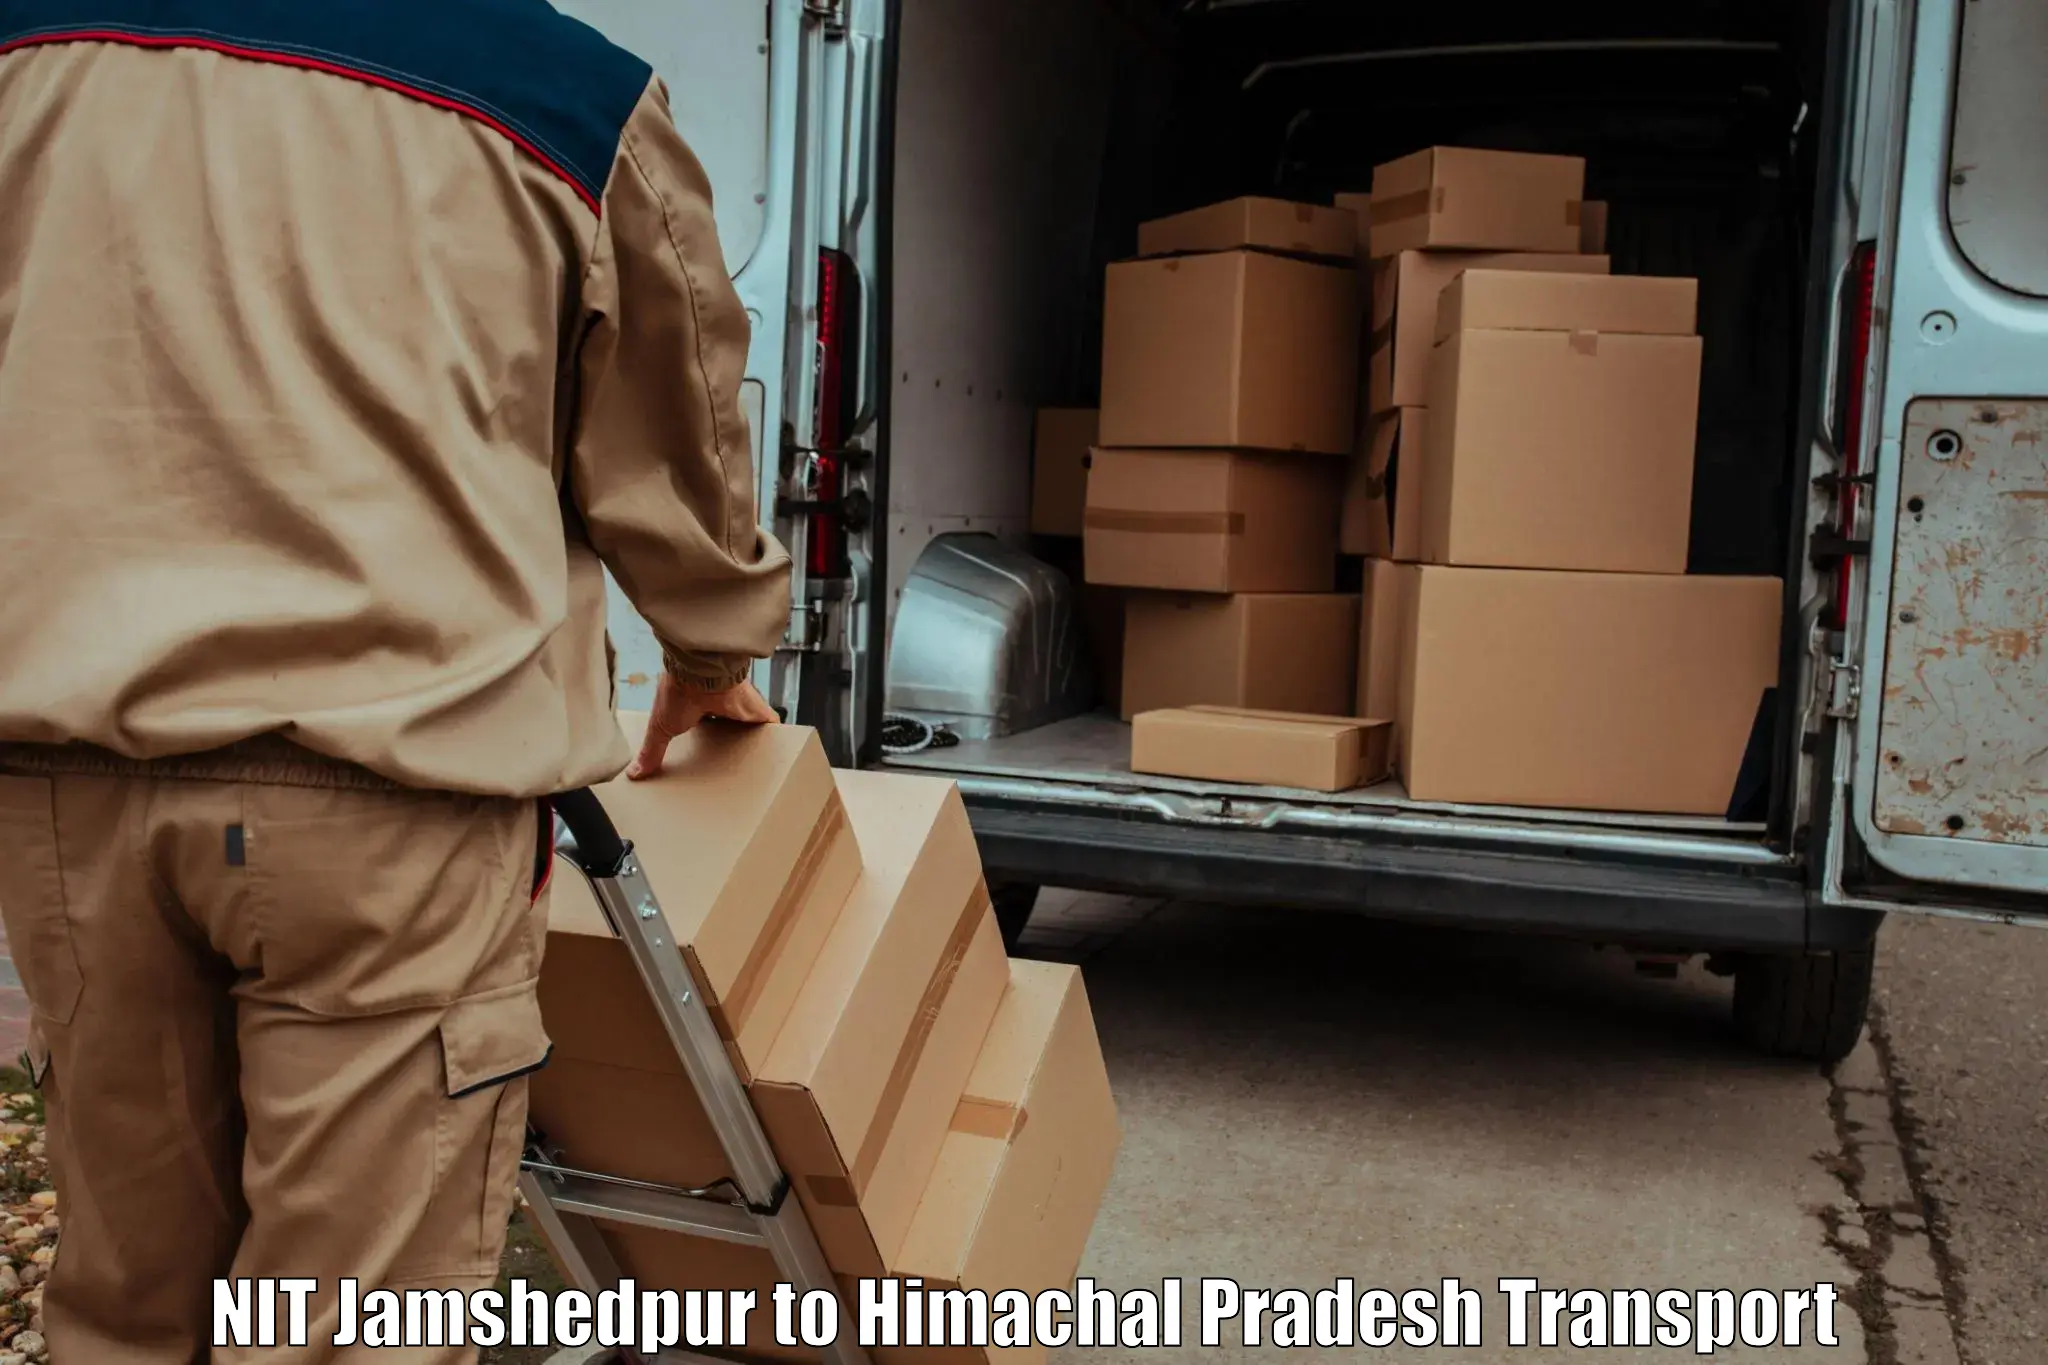 Air freight transport services NIT Jamshedpur to Chintpurni